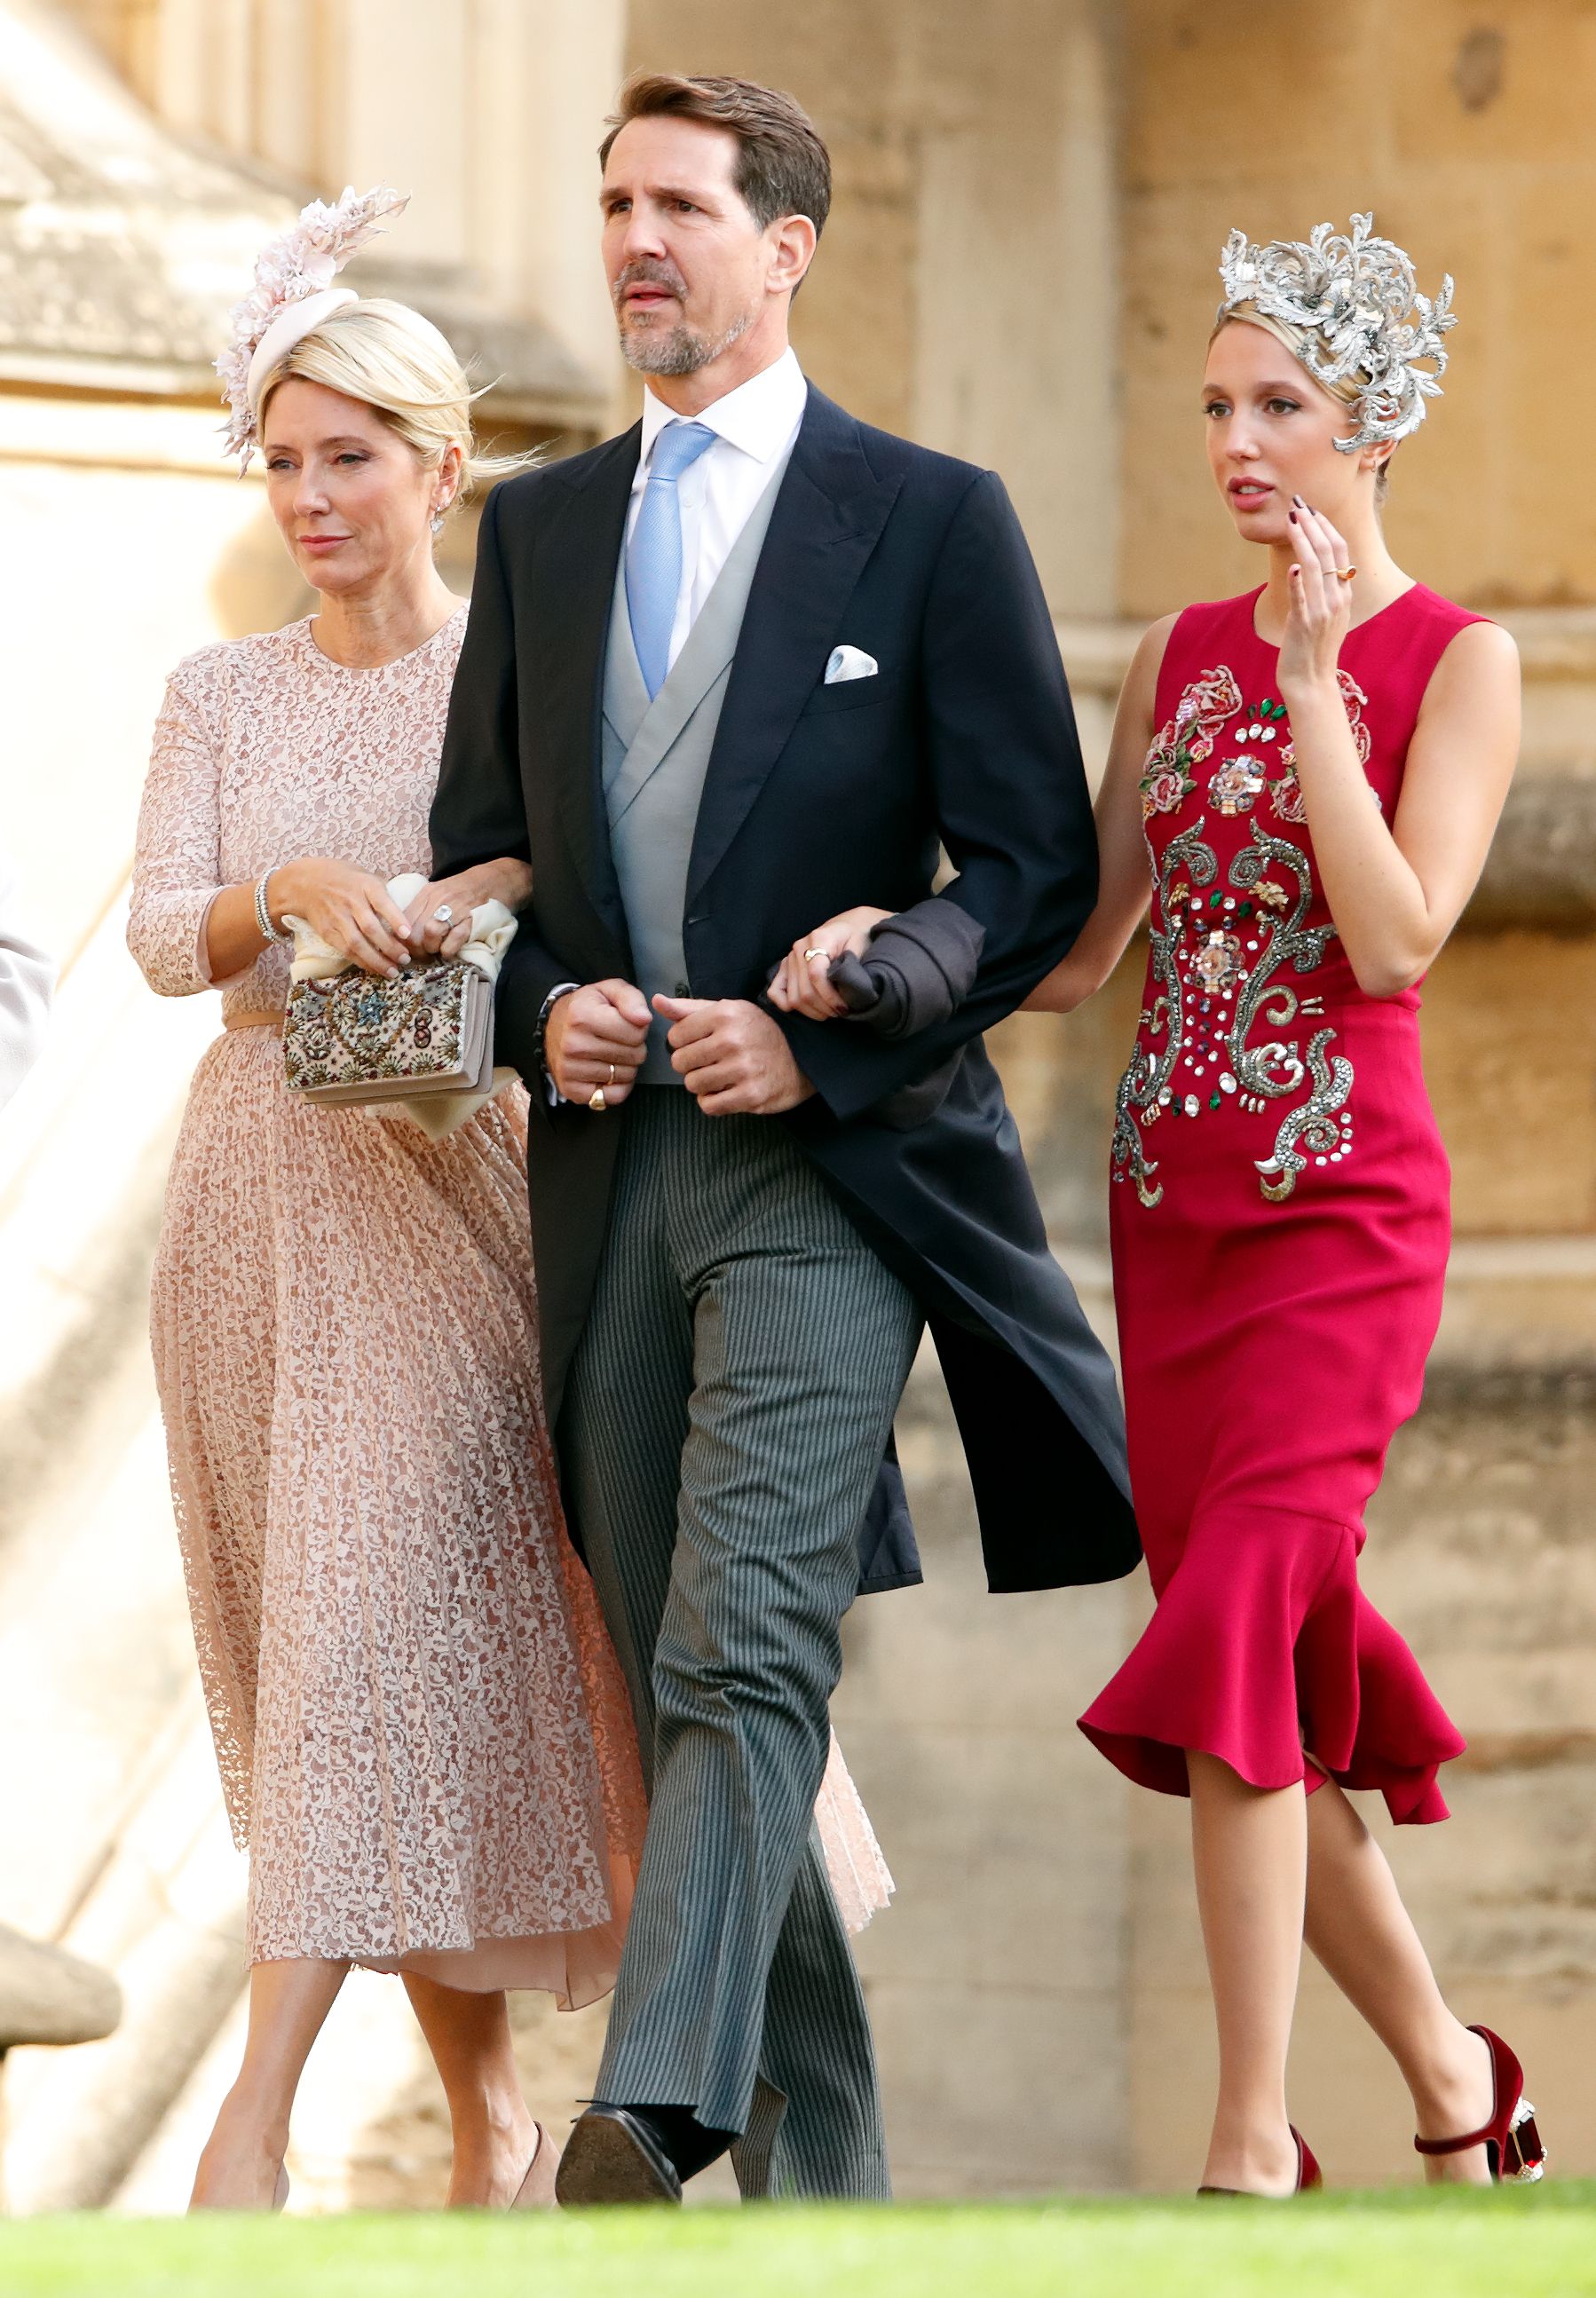 The 42 Best-Dressed Celebrity Wedding Guests